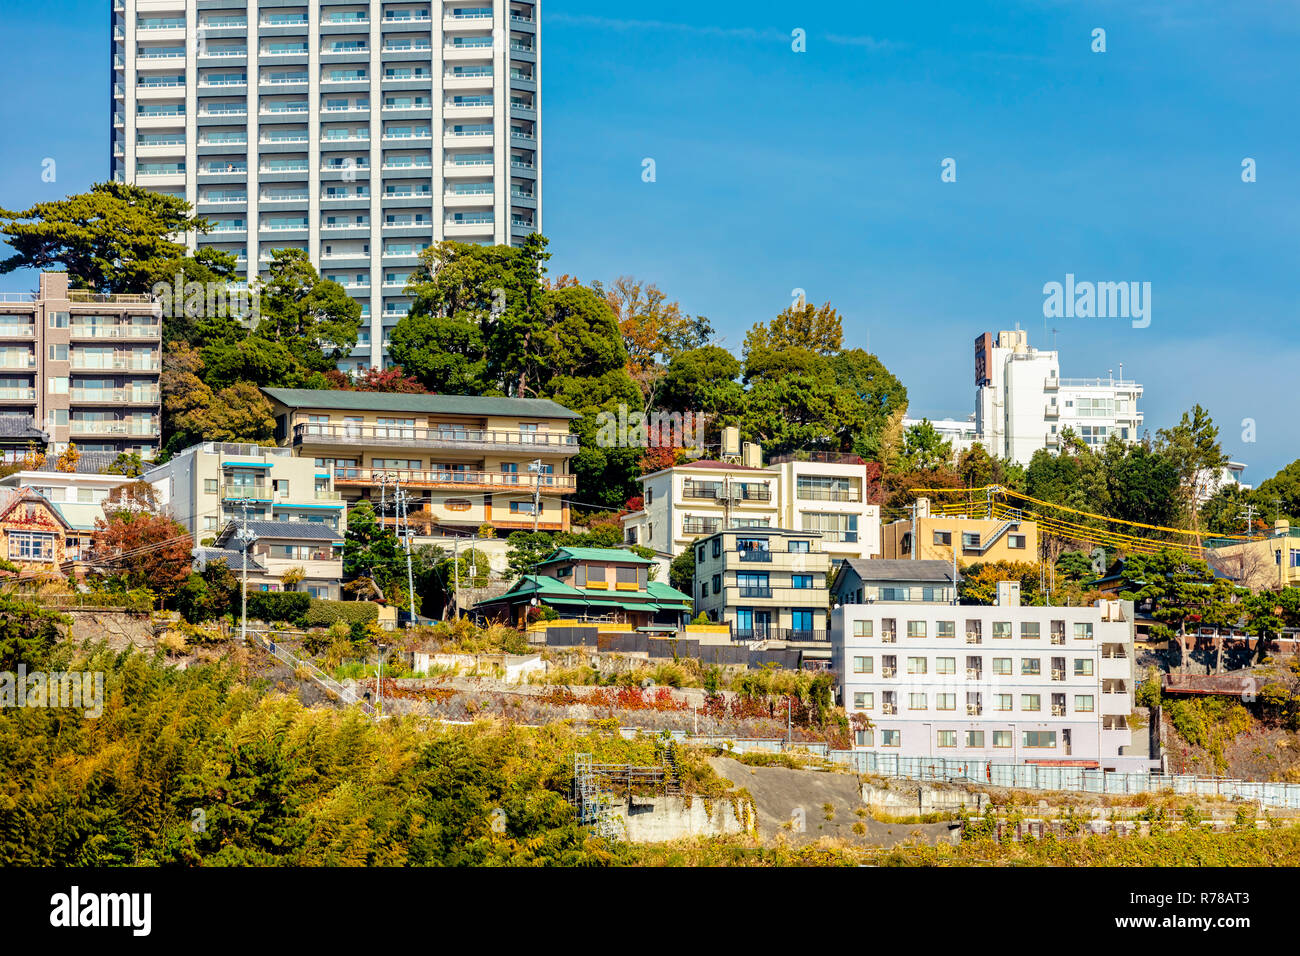 Atami, Shizuoka / Japan - December 1 2018: Aerial cityscape view of Atami beach and city centre, popular onsen leisure resort town in Autumn Stock Photo